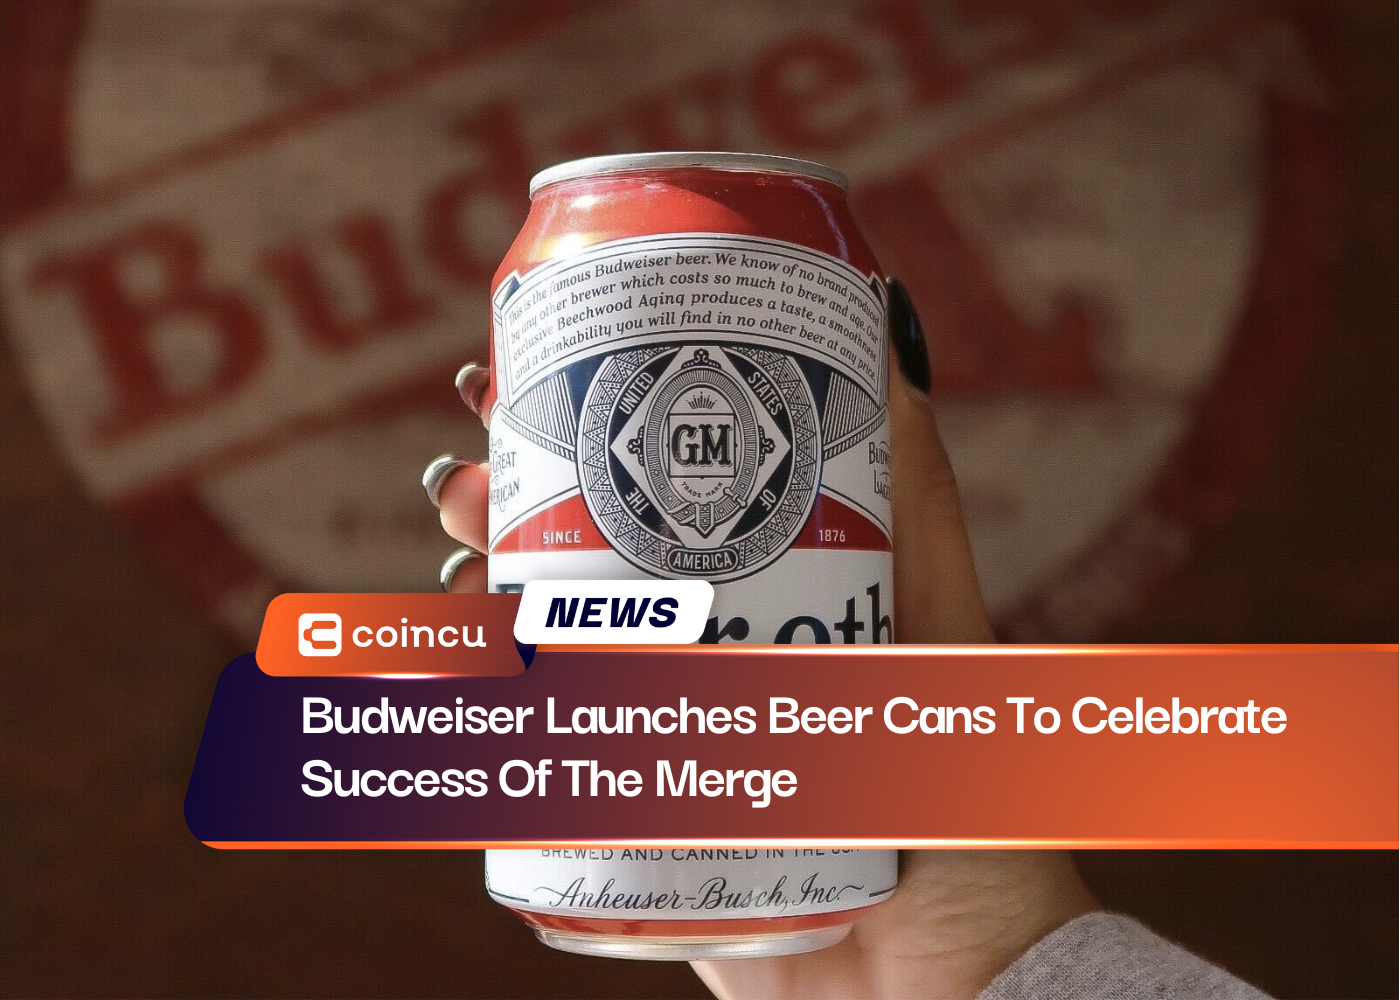 Budweiser Launches Beer Cans To Celebrate Success Of The Merge